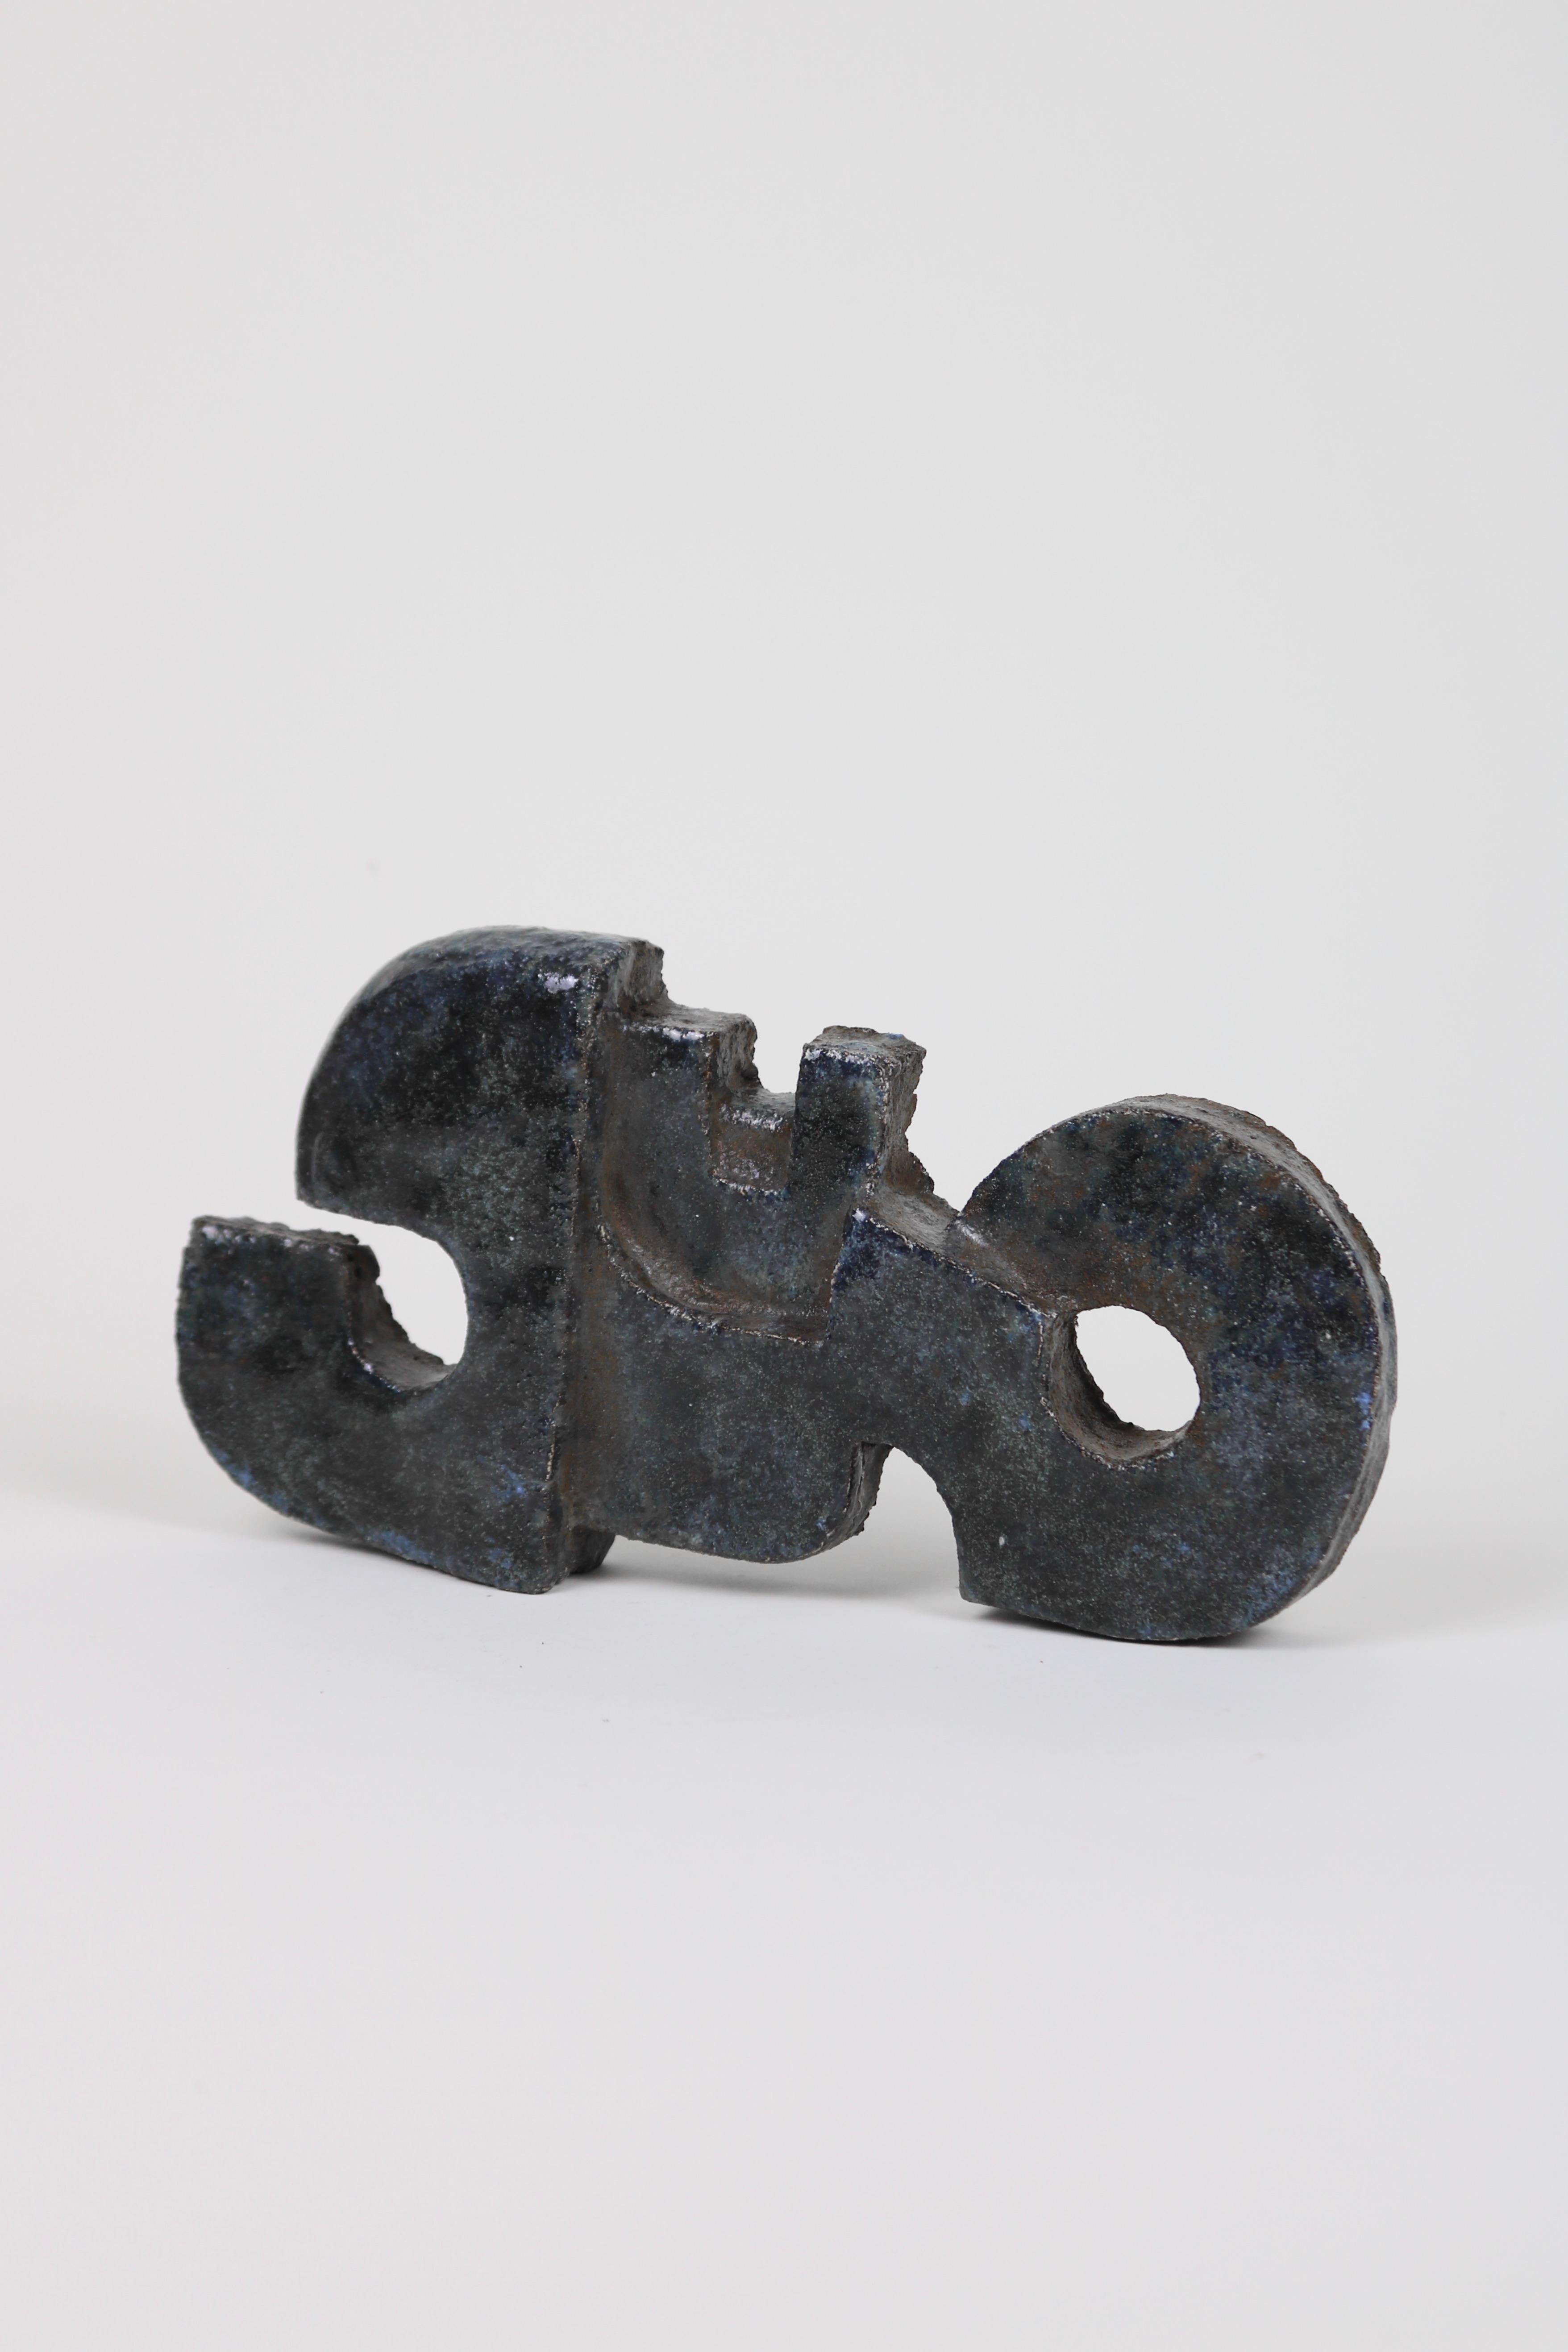 An abstract form made from clay with a blue-hued glaze. Can be laid flat or wall-hung. 

Guus Zuiderwijk is a Dutch sculptor and artist. This piece is thought to be an output from his time at the innovative Experimental Department of De Porceleyne